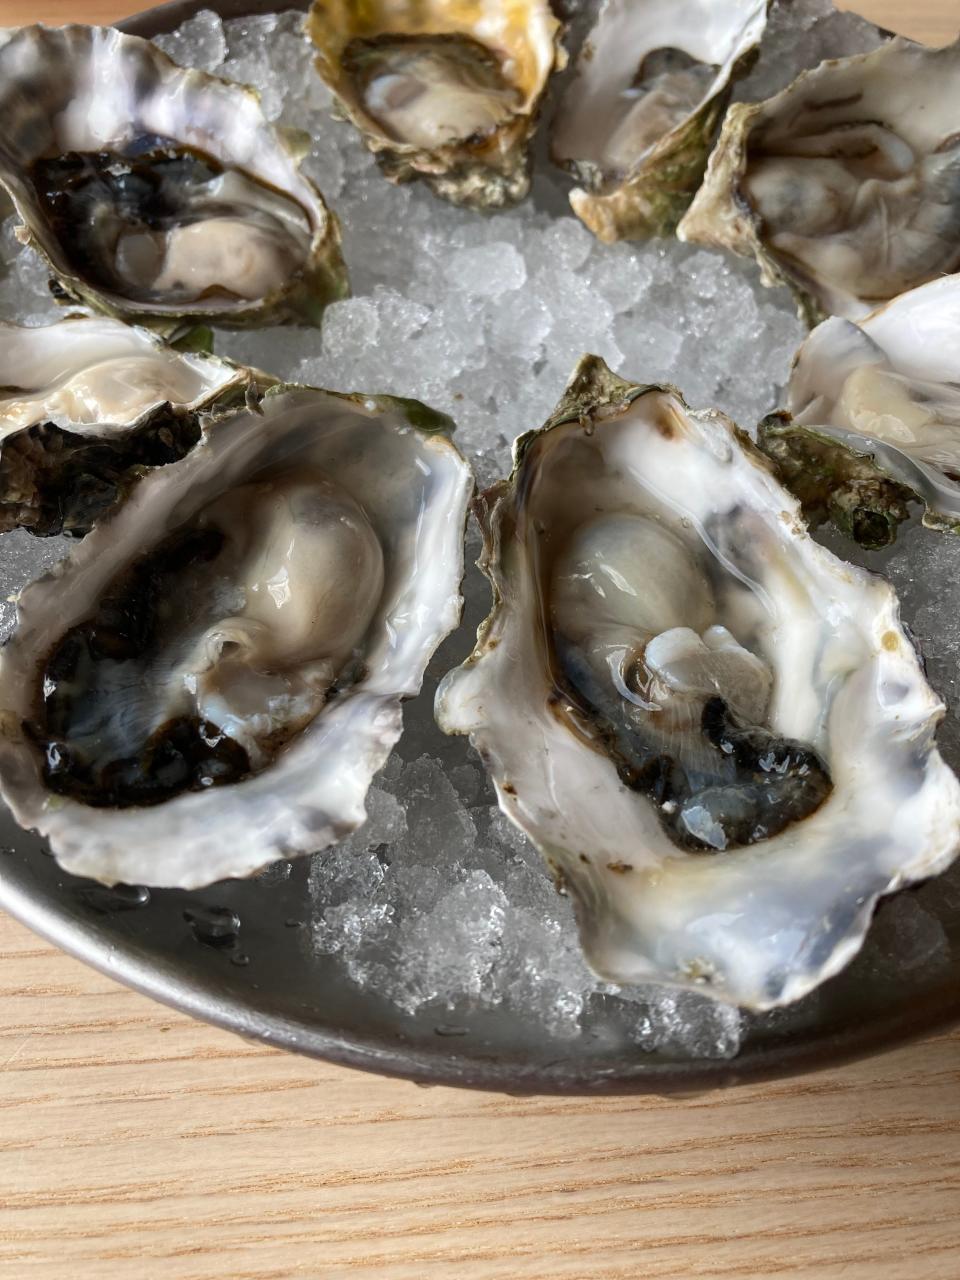 Oysters at Locust in the 12 South neighborhood of Nashville.